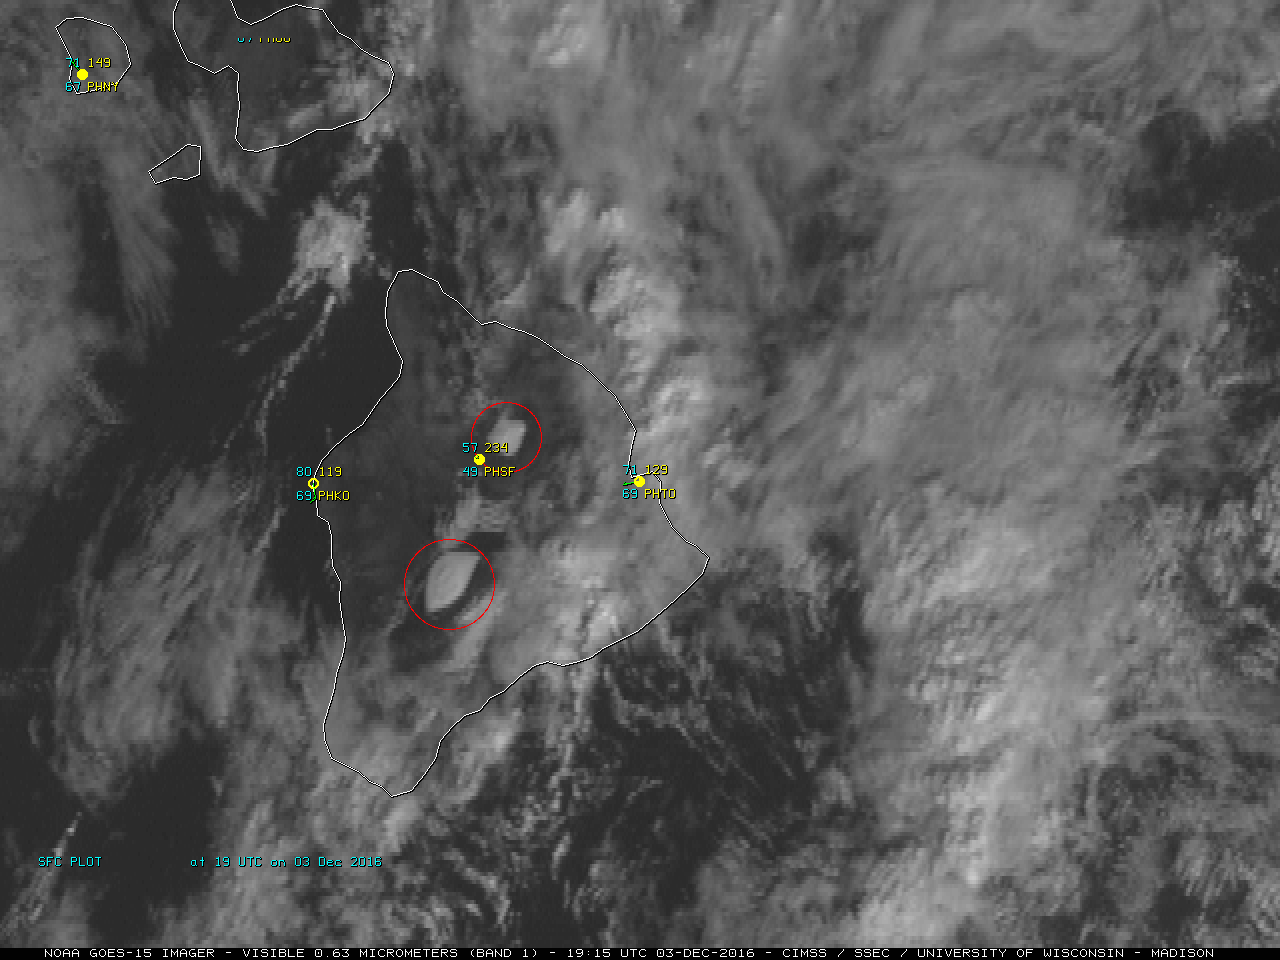 GOES-15 Visible (0.63 µm) images, with hourly surface reports [click to play animation]